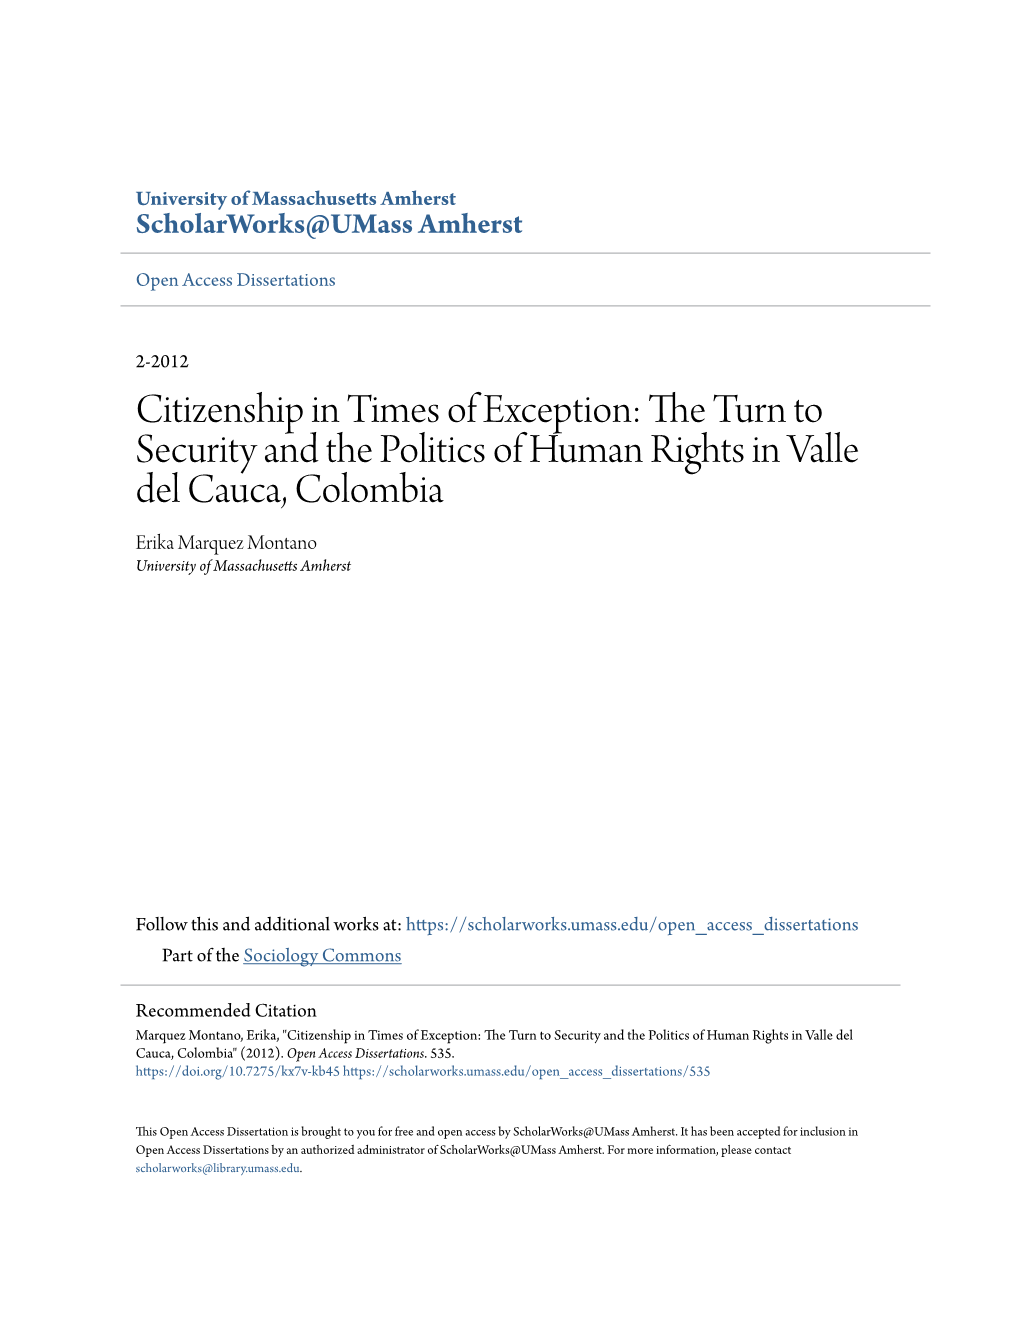 Citizenship in Times of Exception: the Turn to Security and the Politics of Human Rights in Valle Del Cauca, Colombia